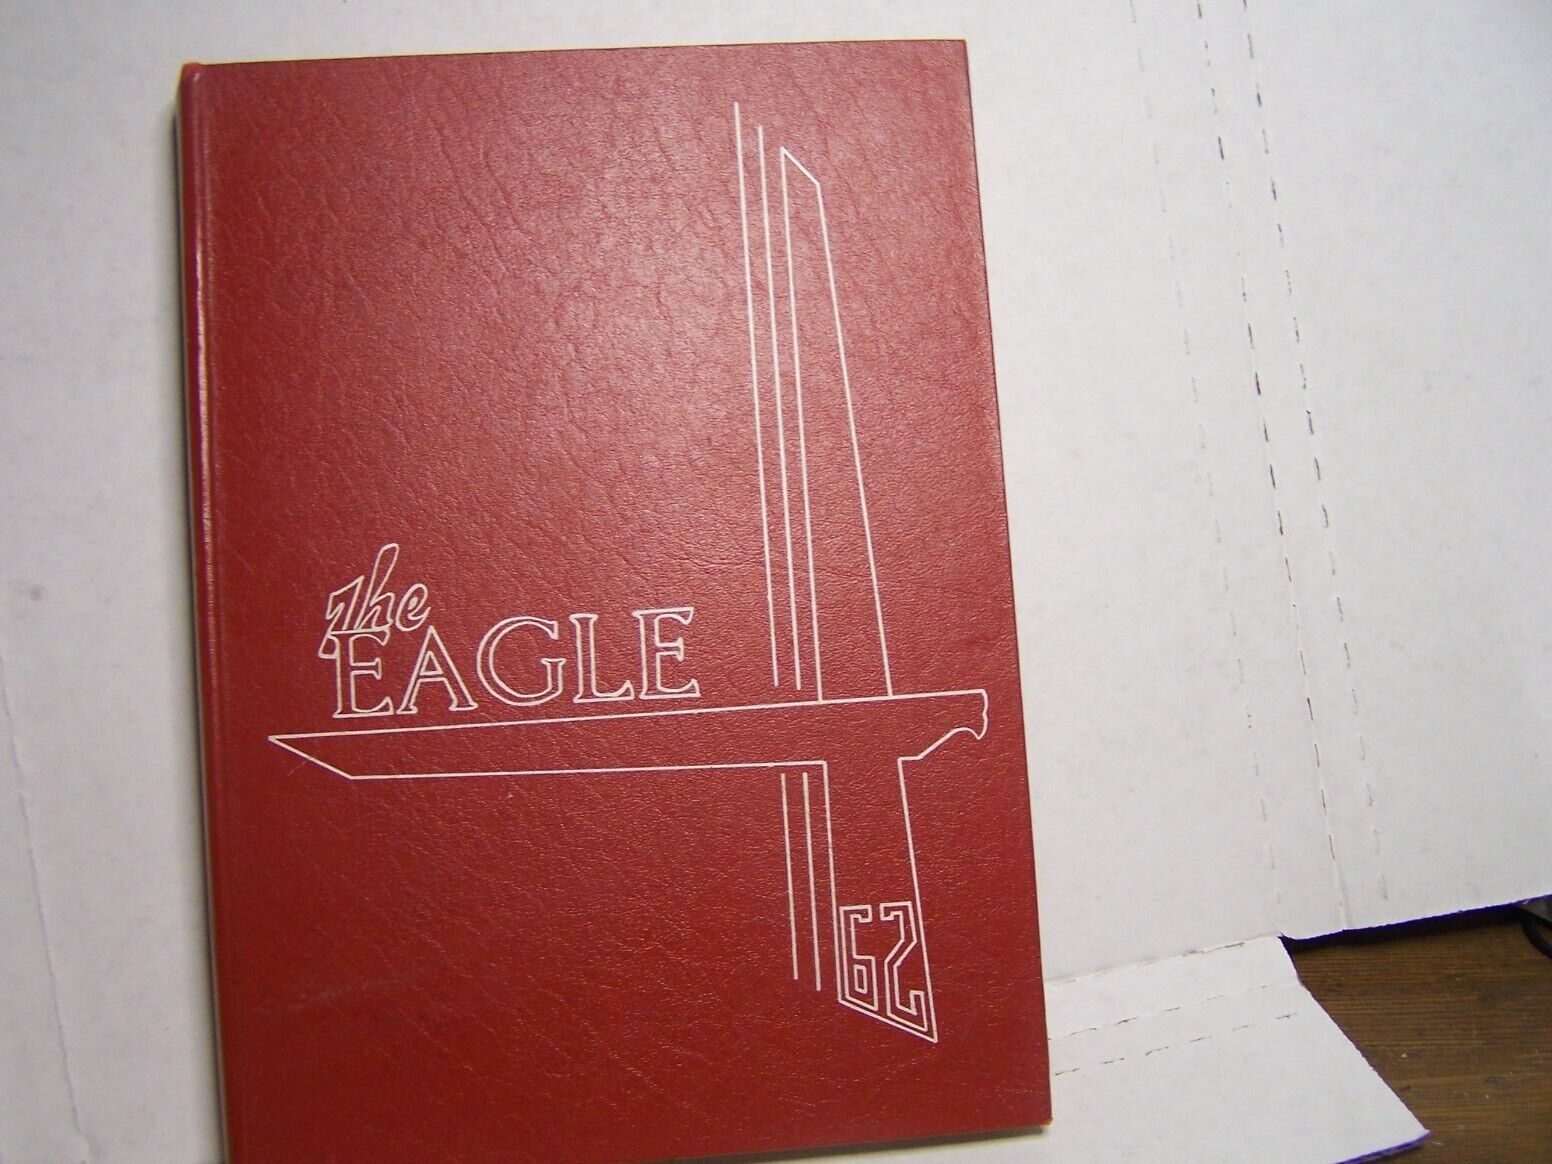 1962 The Eagle - Treadwell High School Yearbook of Memphis, Tennessee